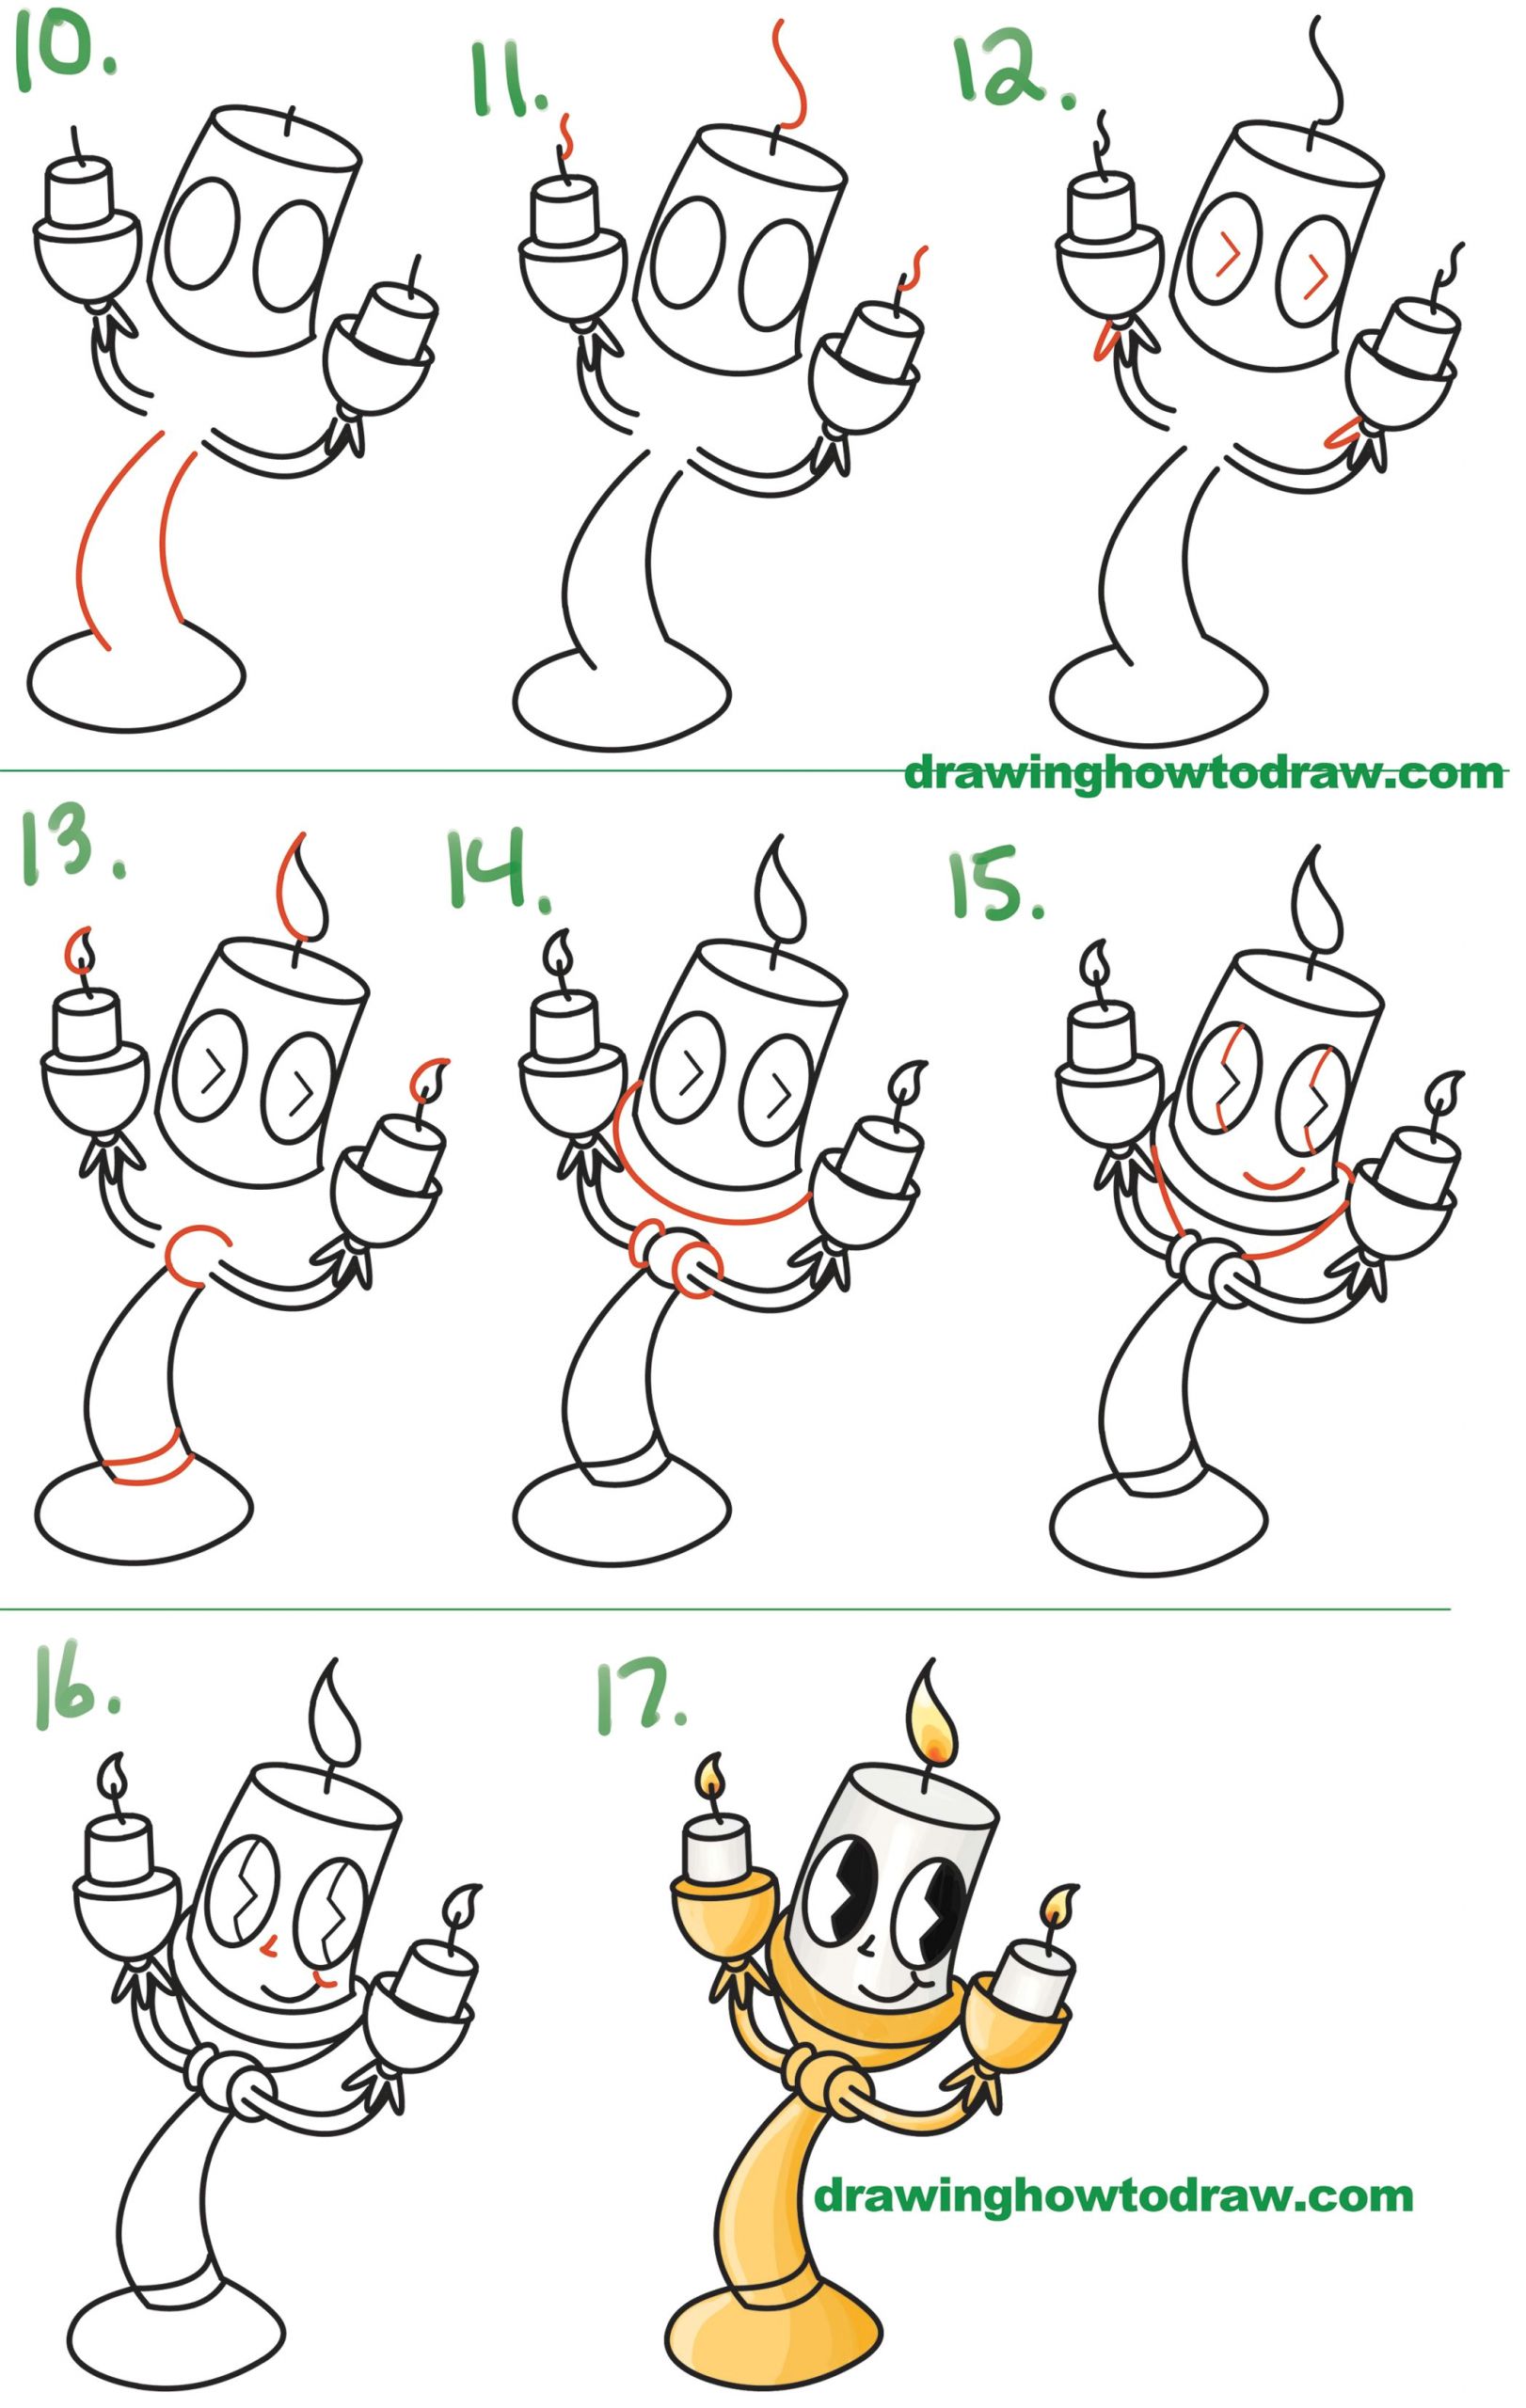 Cute Easy Drawings Step by Step Animals How to Draw Lumiere Cute Kawaii Chibi From Beauty and